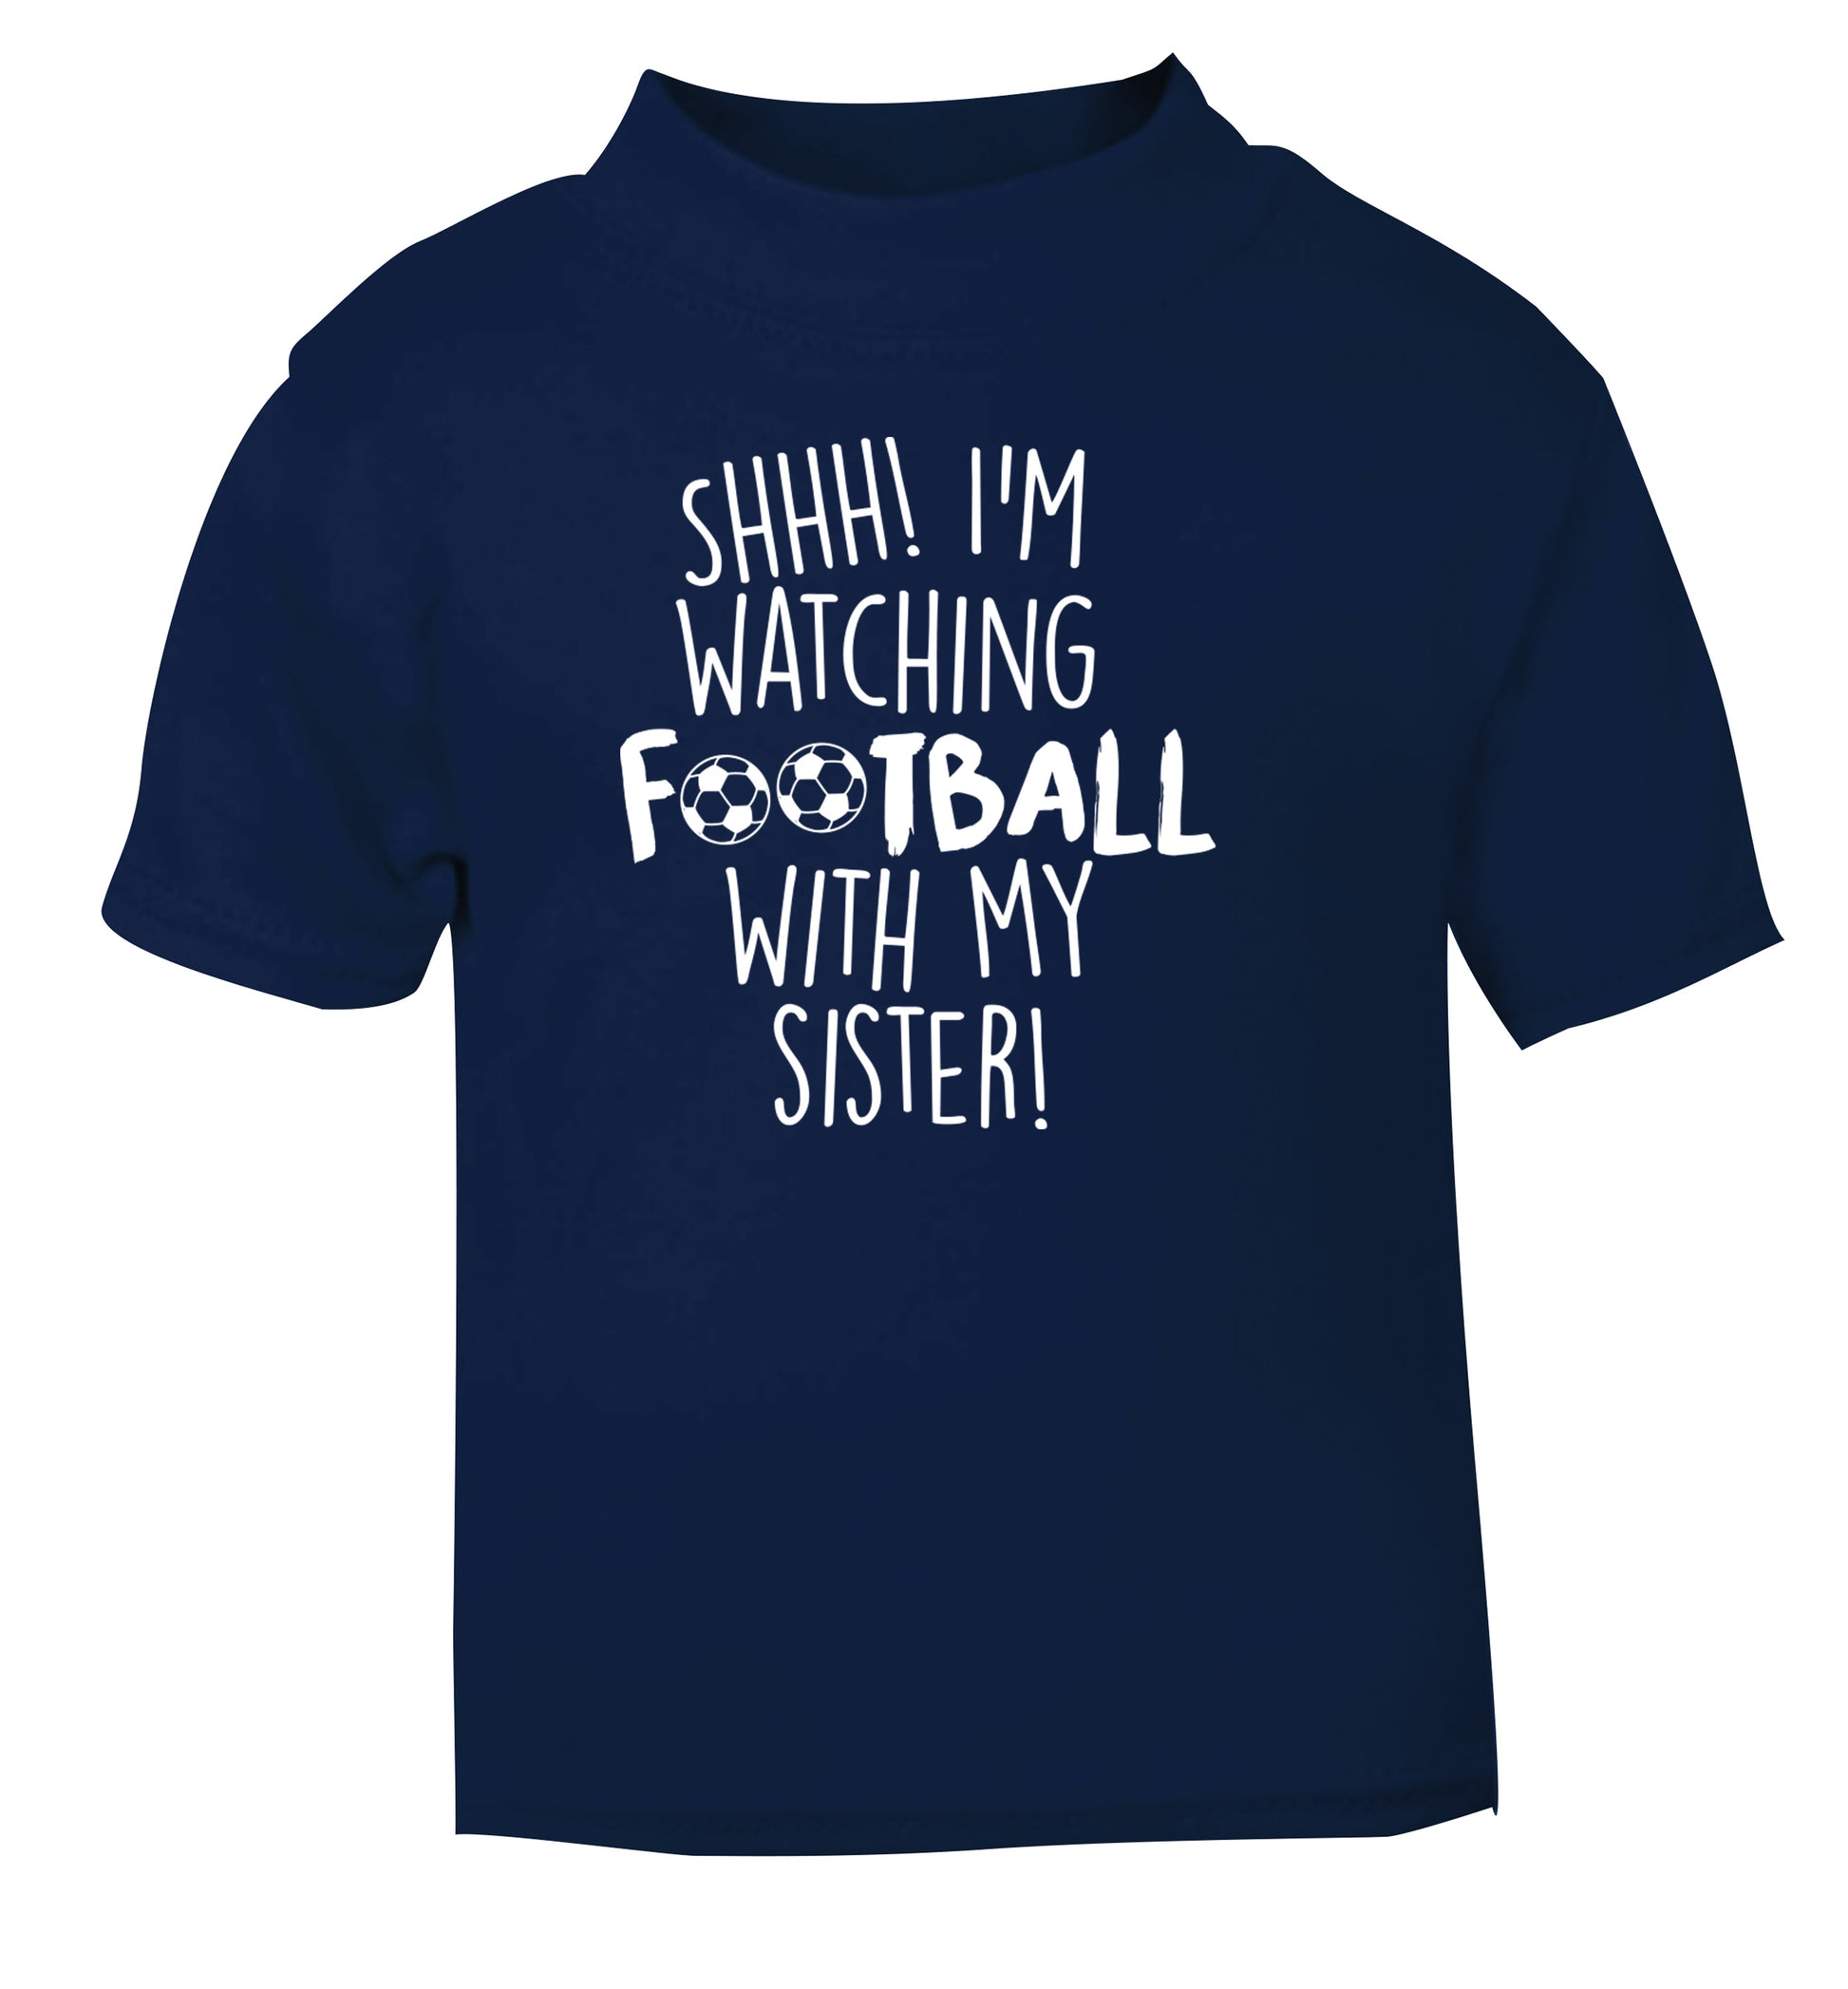 Shhh I'm watching football with my sister navy Baby Toddler Tshirt 2 Years